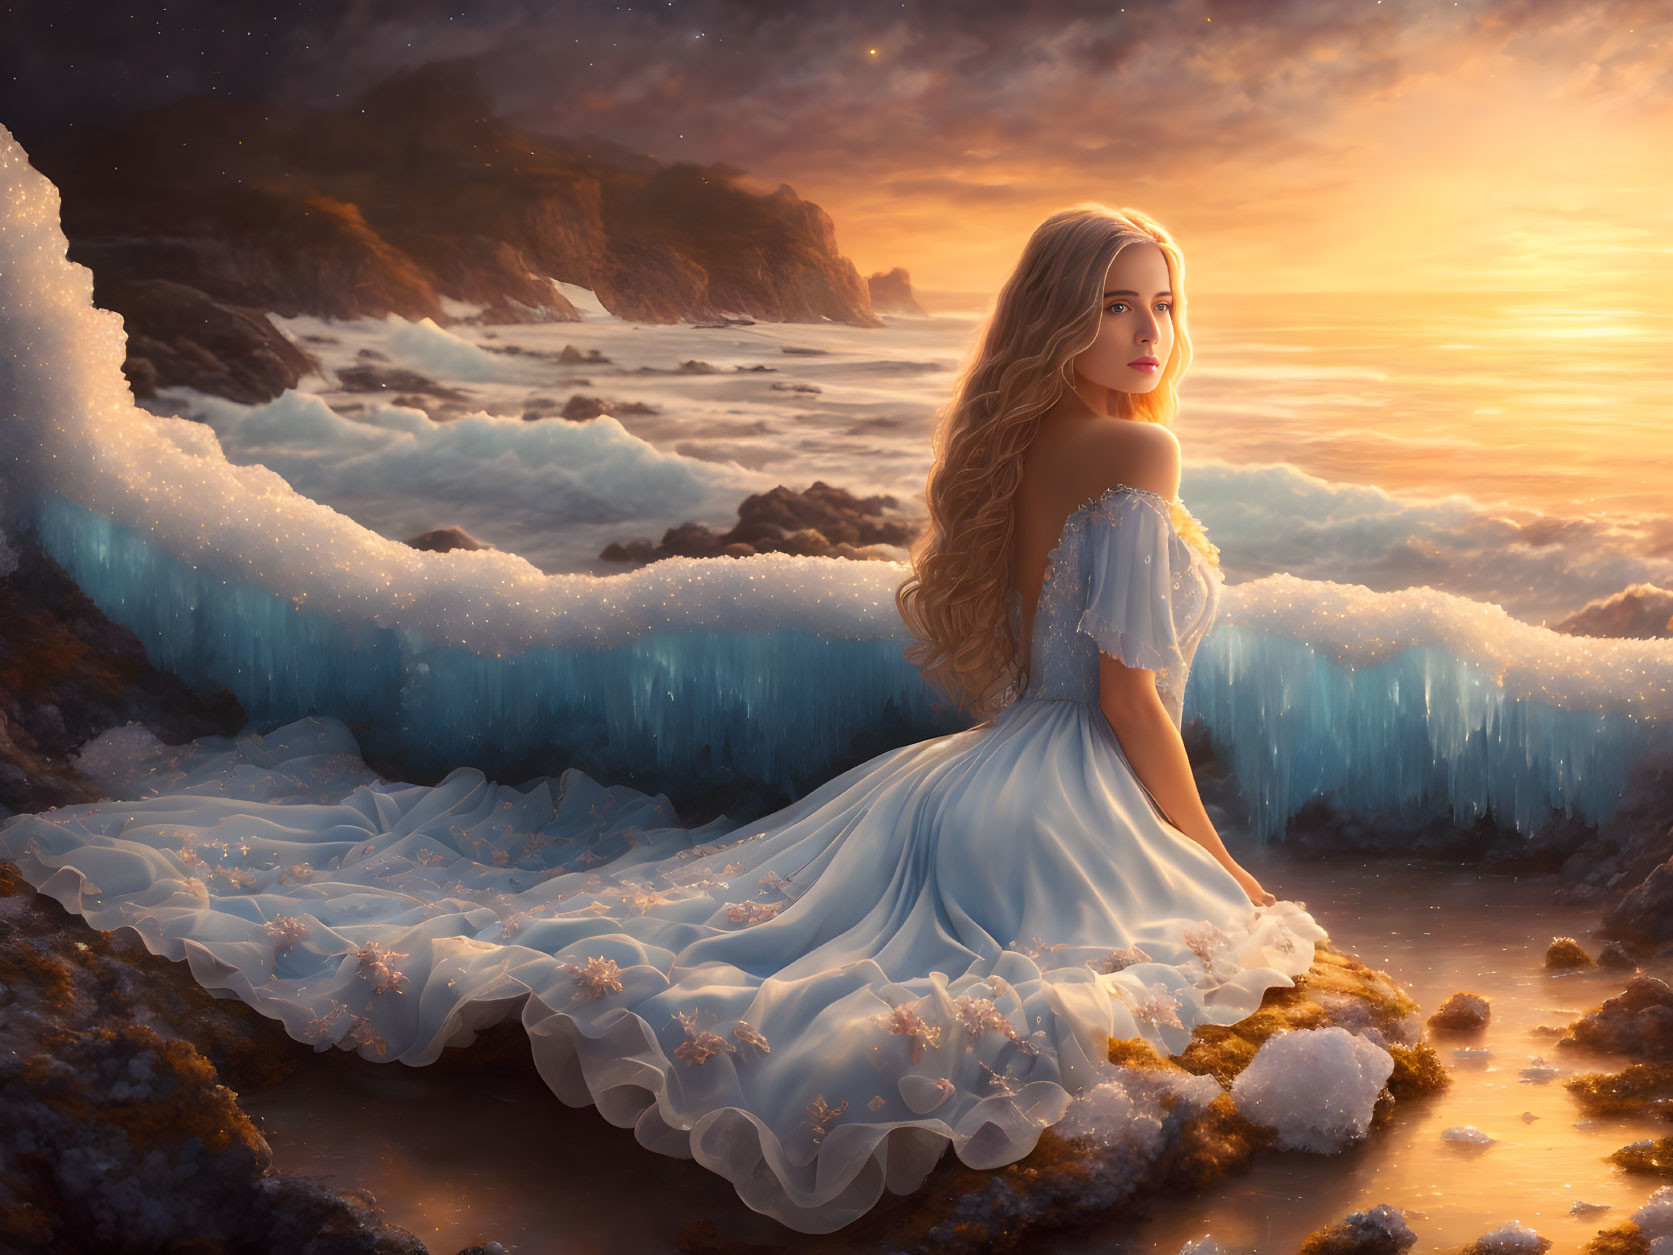 Woman in flowing white dress by sea at sunset with cascading hair.